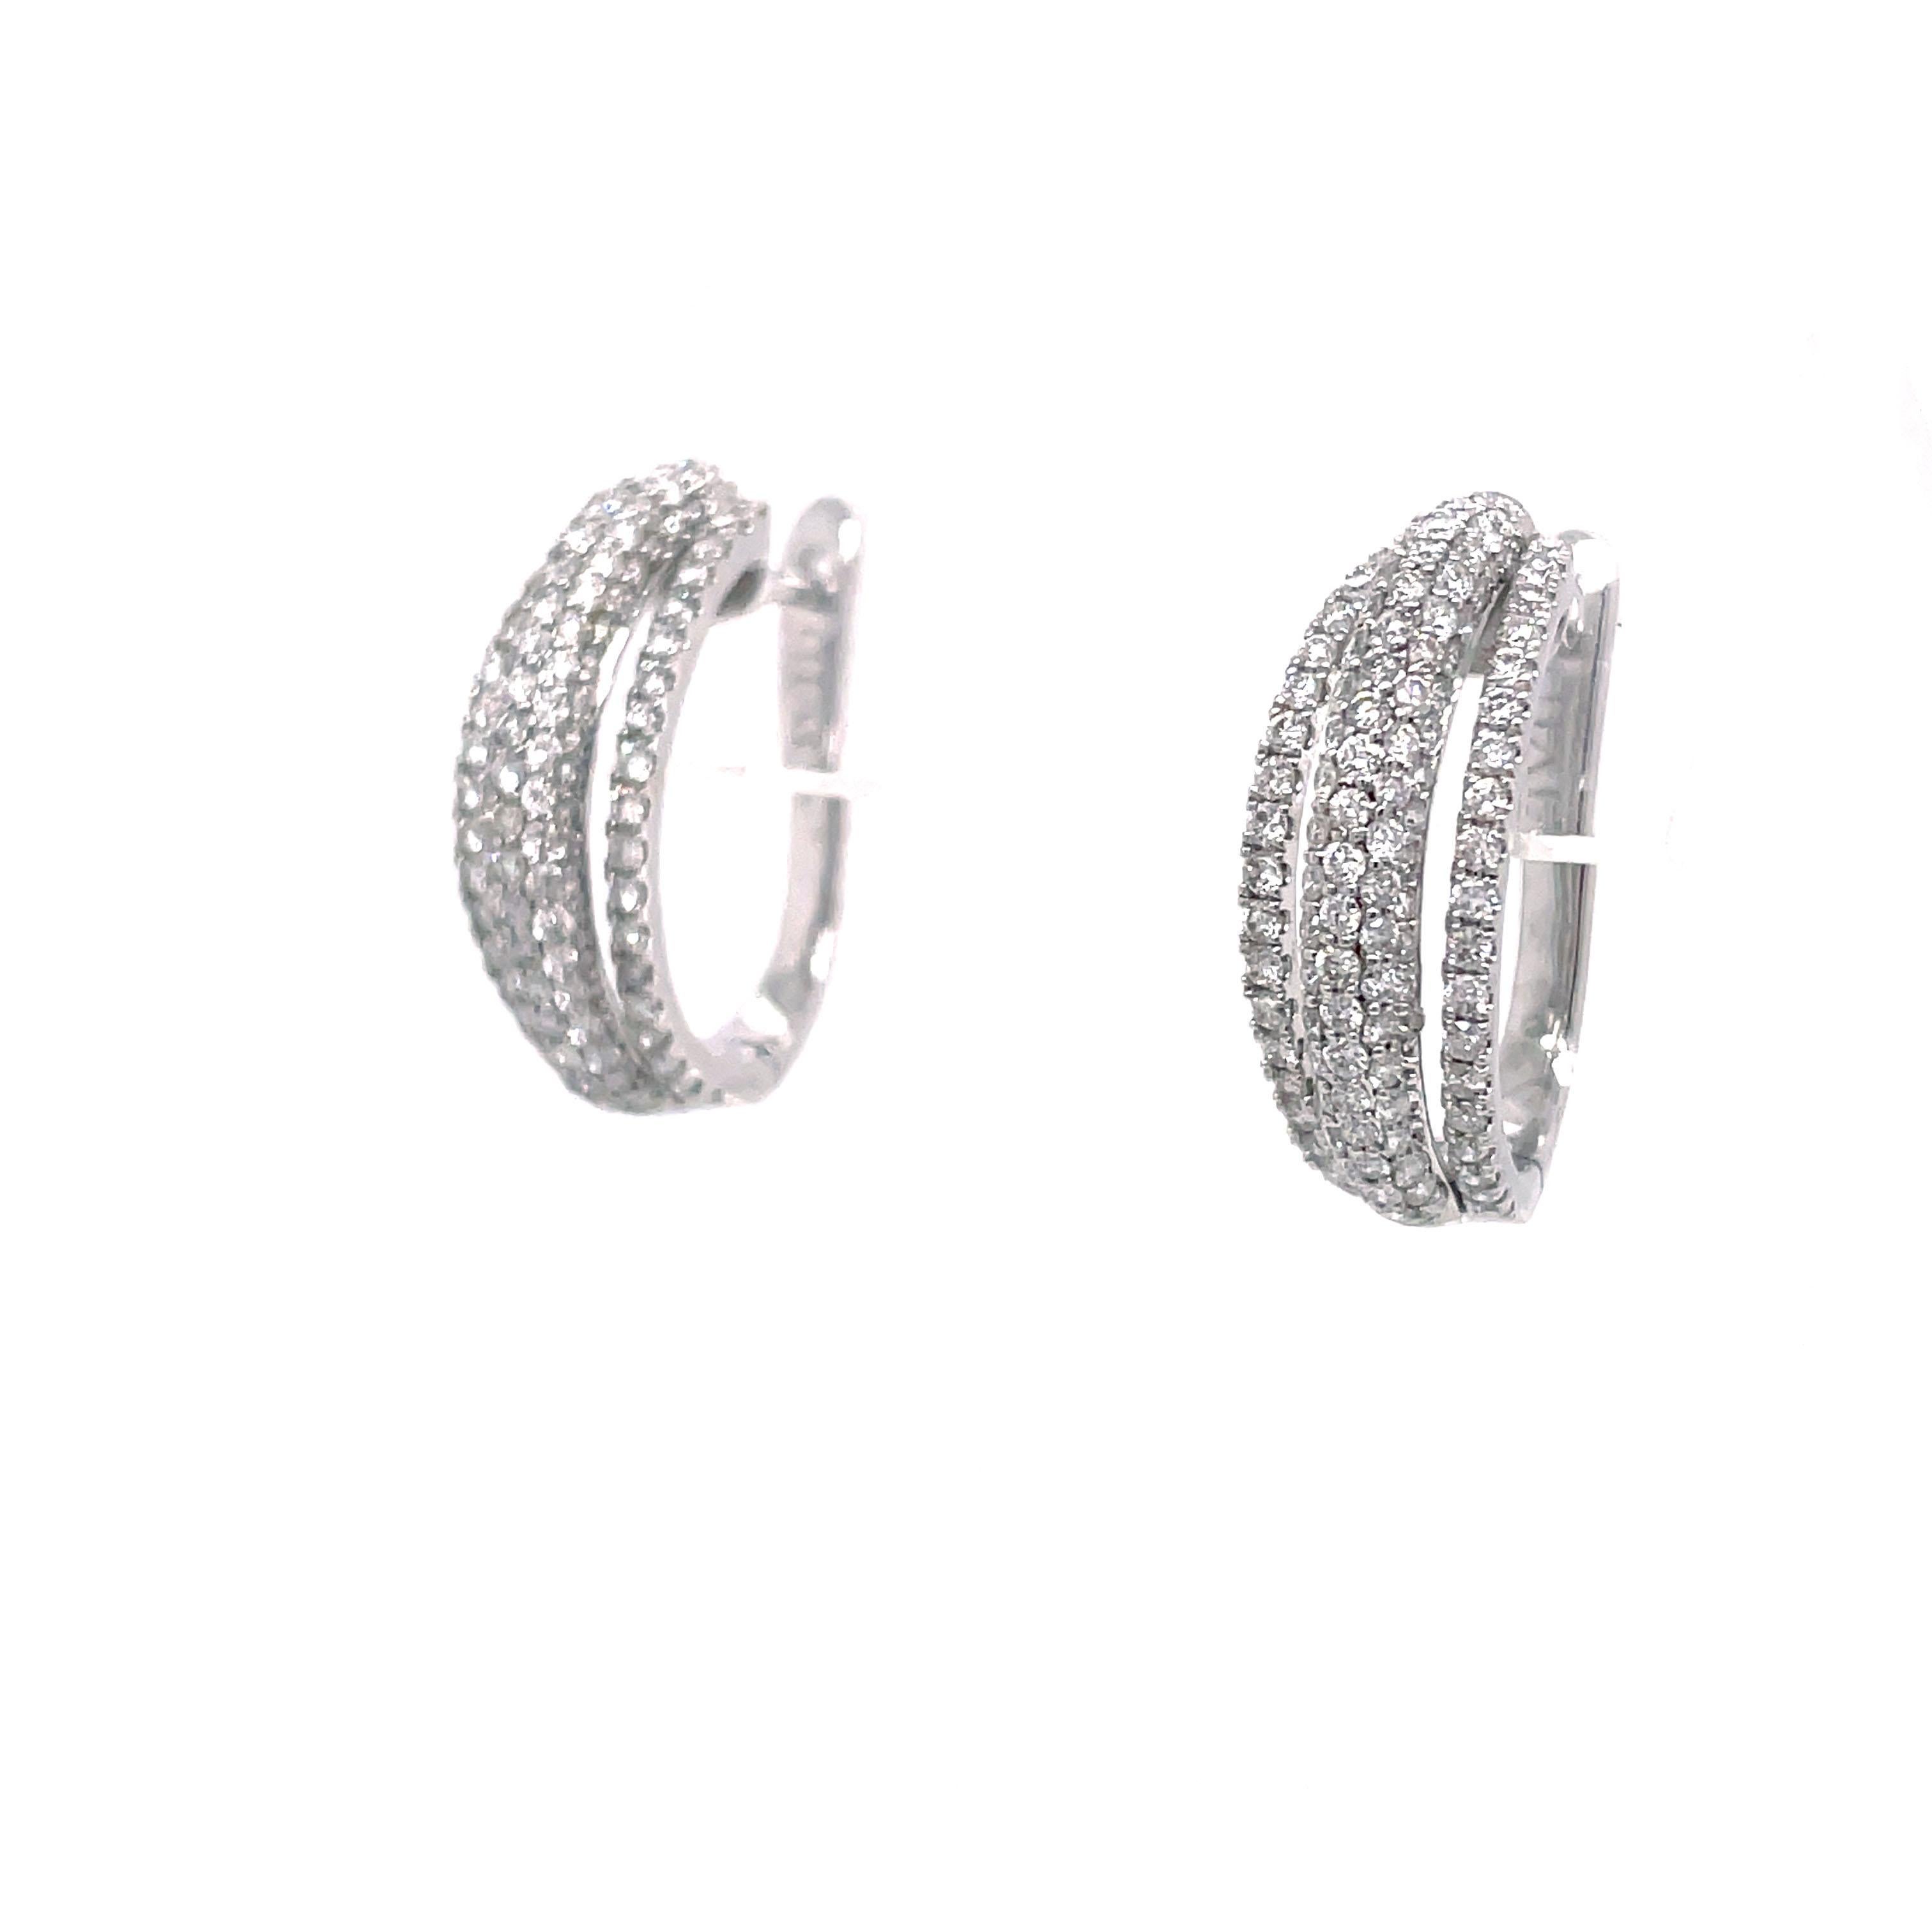 Three Row Pave 1.28 Carat Diamond Hoop 18K White Gold Earrings  In Excellent Condition For Sale In Lexington, KY